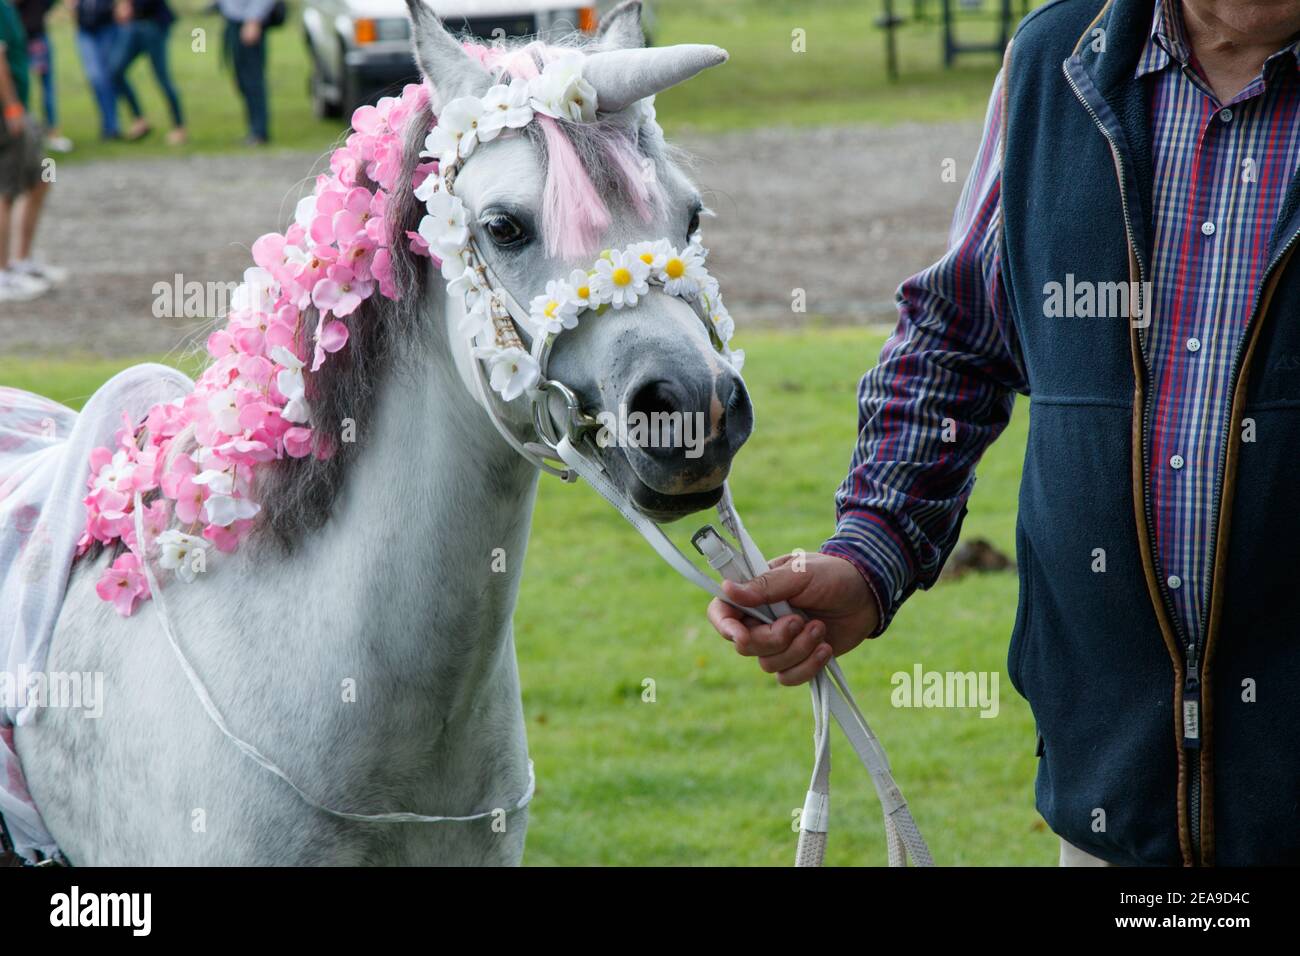 In Ripley, North Yorkshire, at a costume contest for horses and ponies, a white pony was adorned to seem like a unicorn with a flower crown. Stock Photo